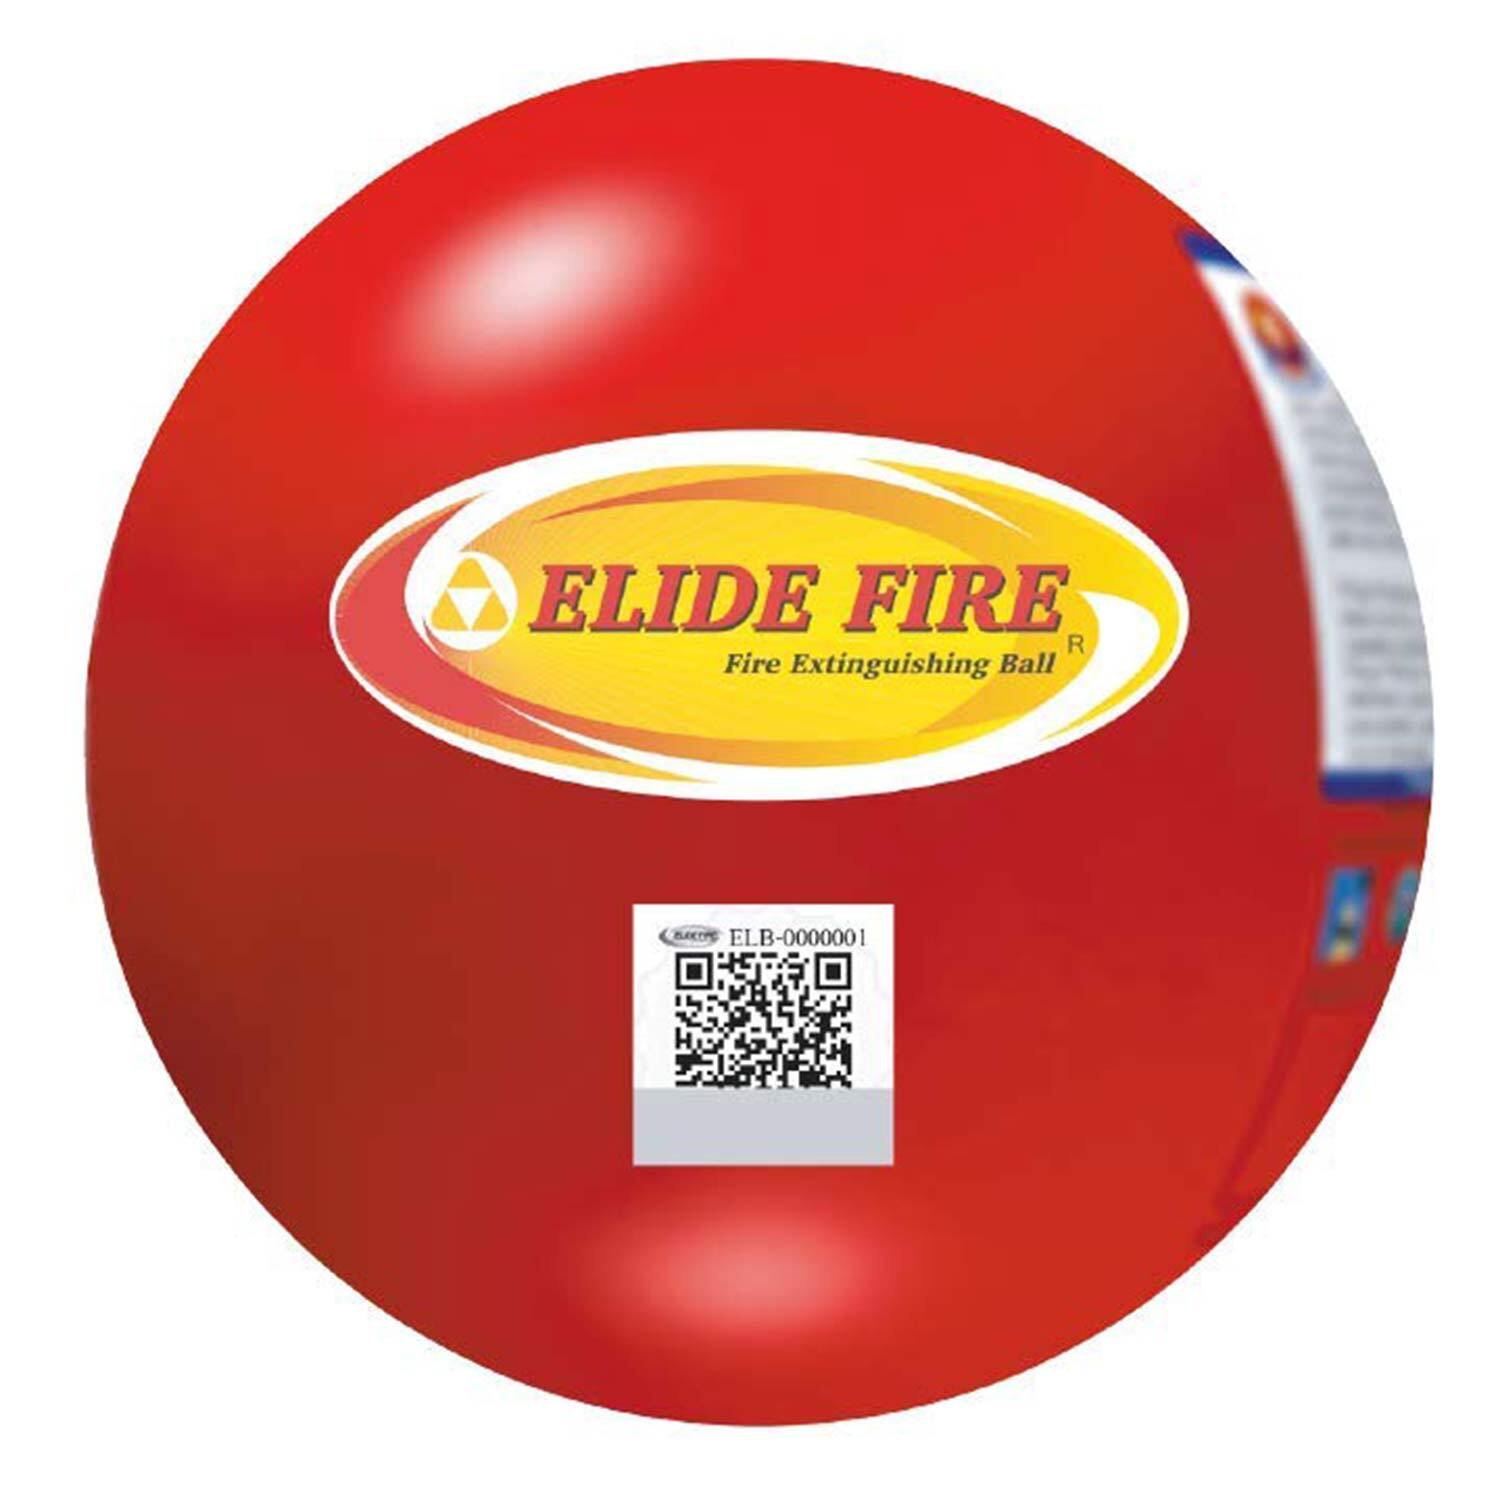 4 Elide Fire Ball Fire Extinguisher Industrial Box Package With Non 